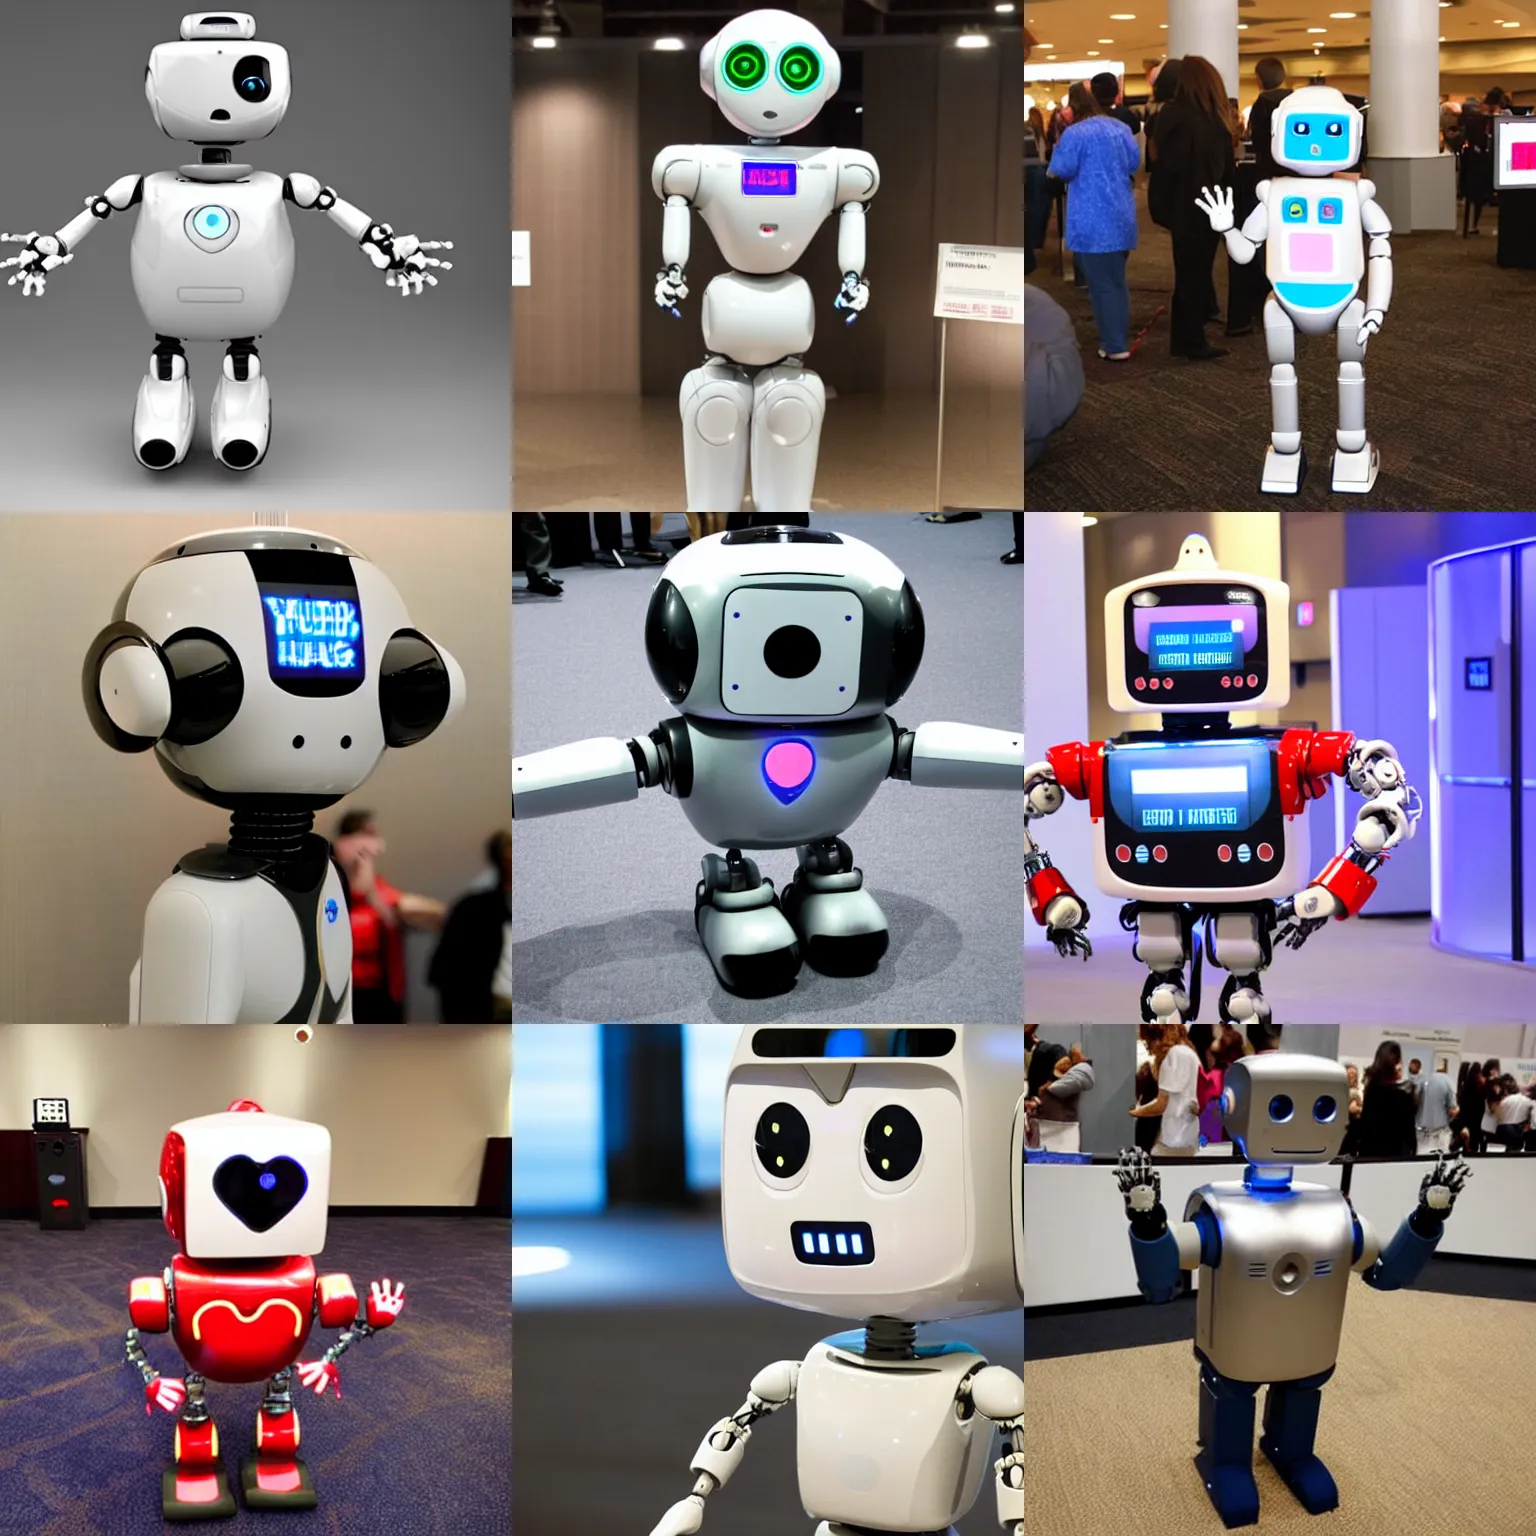 Prompt: <robot attention-grabbing wants=hug expression='give hug now' location='las vegas convention center'>cute little robot</robot>